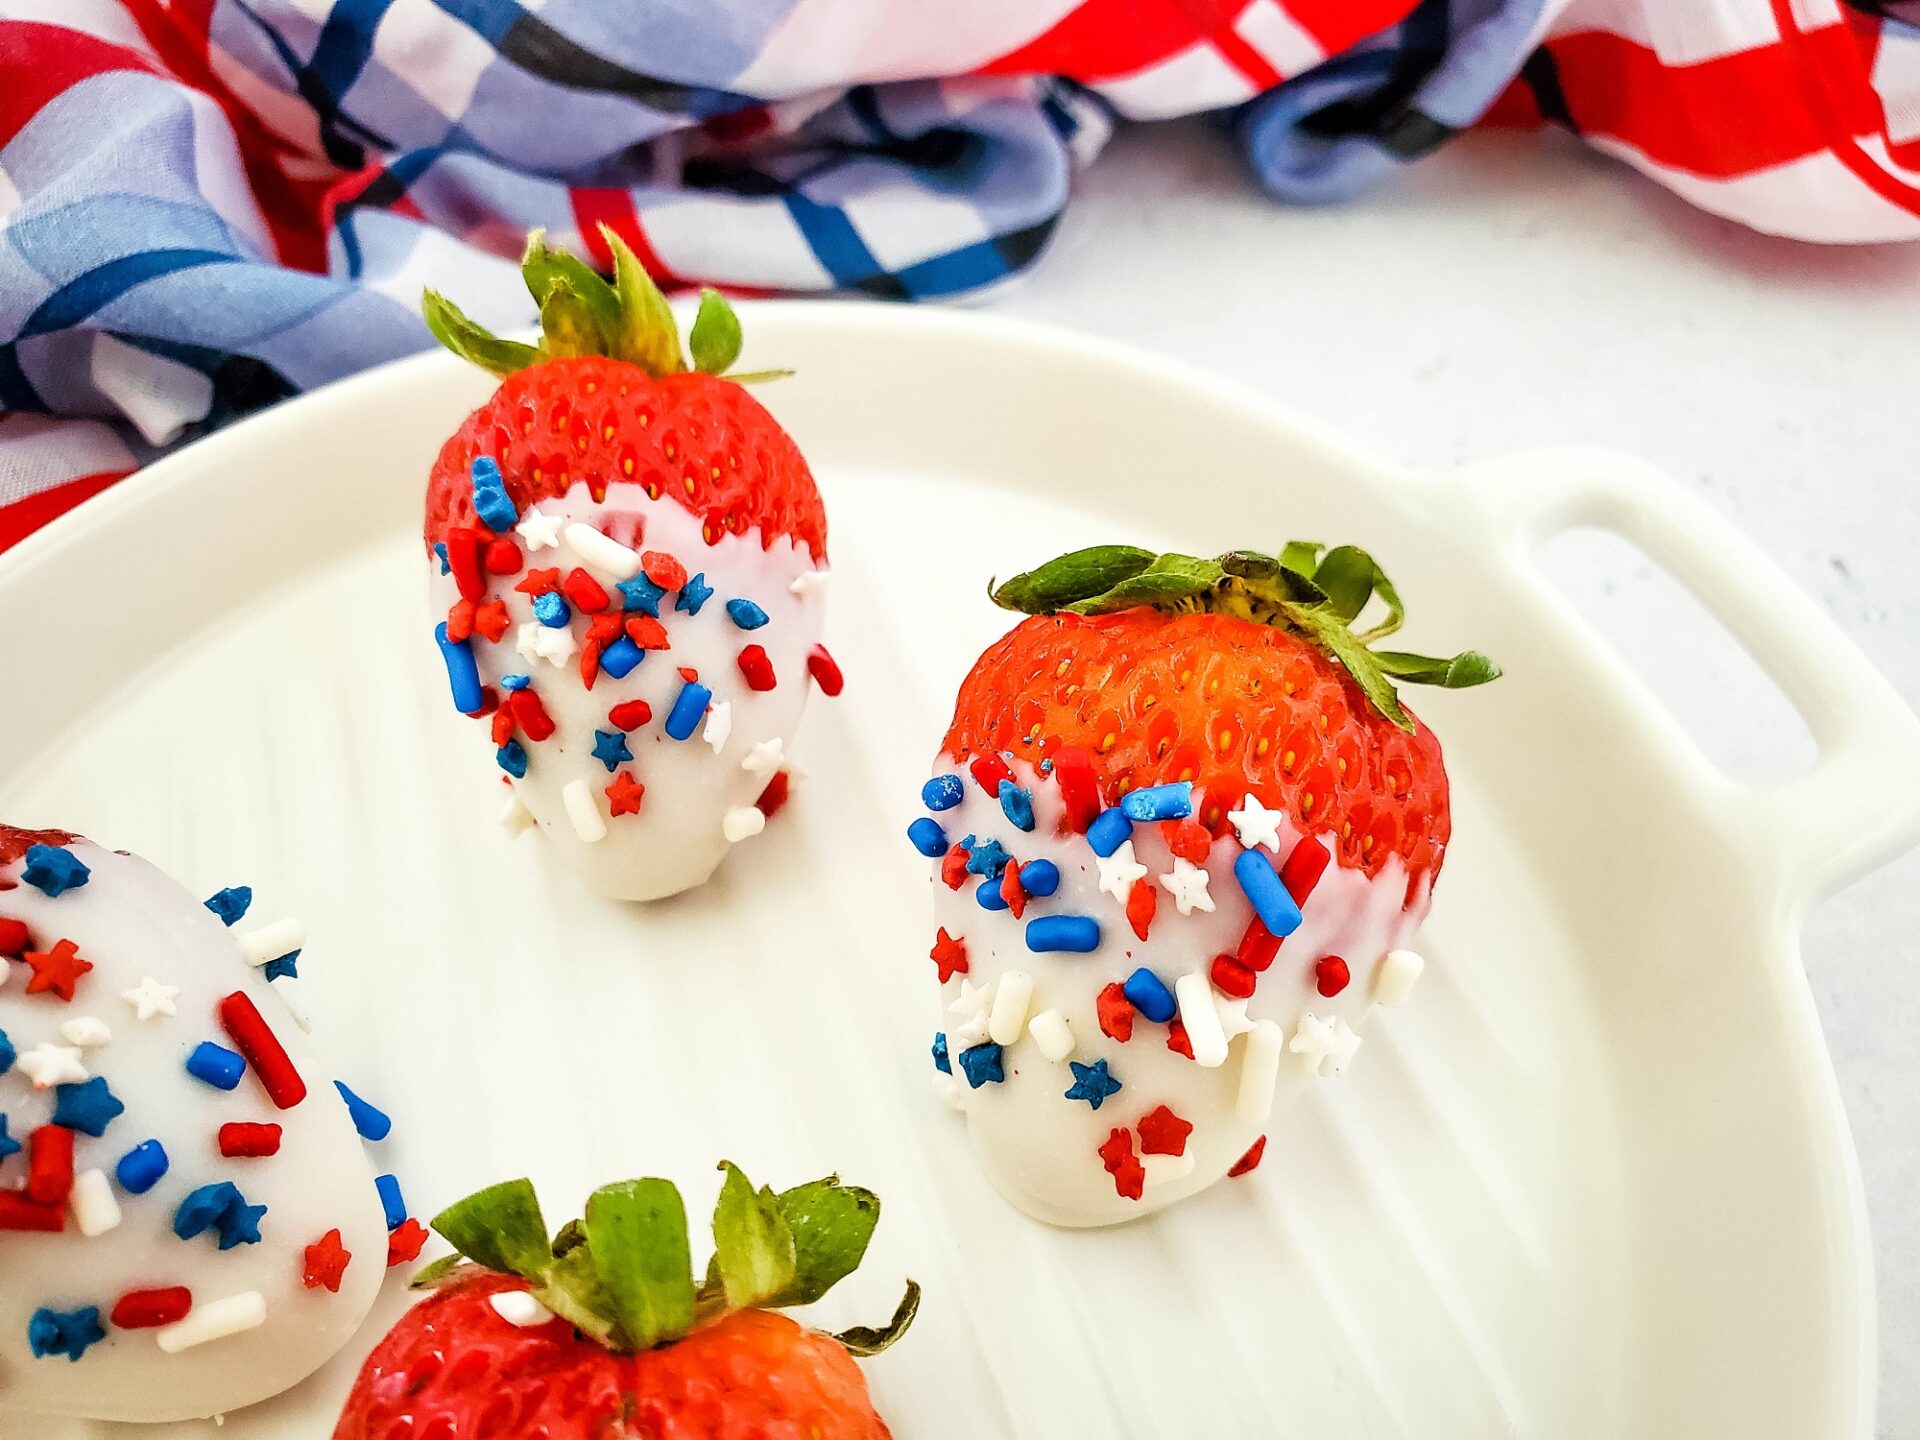 Chocolate Dipped Strawberries with red white and blue sprinkles.